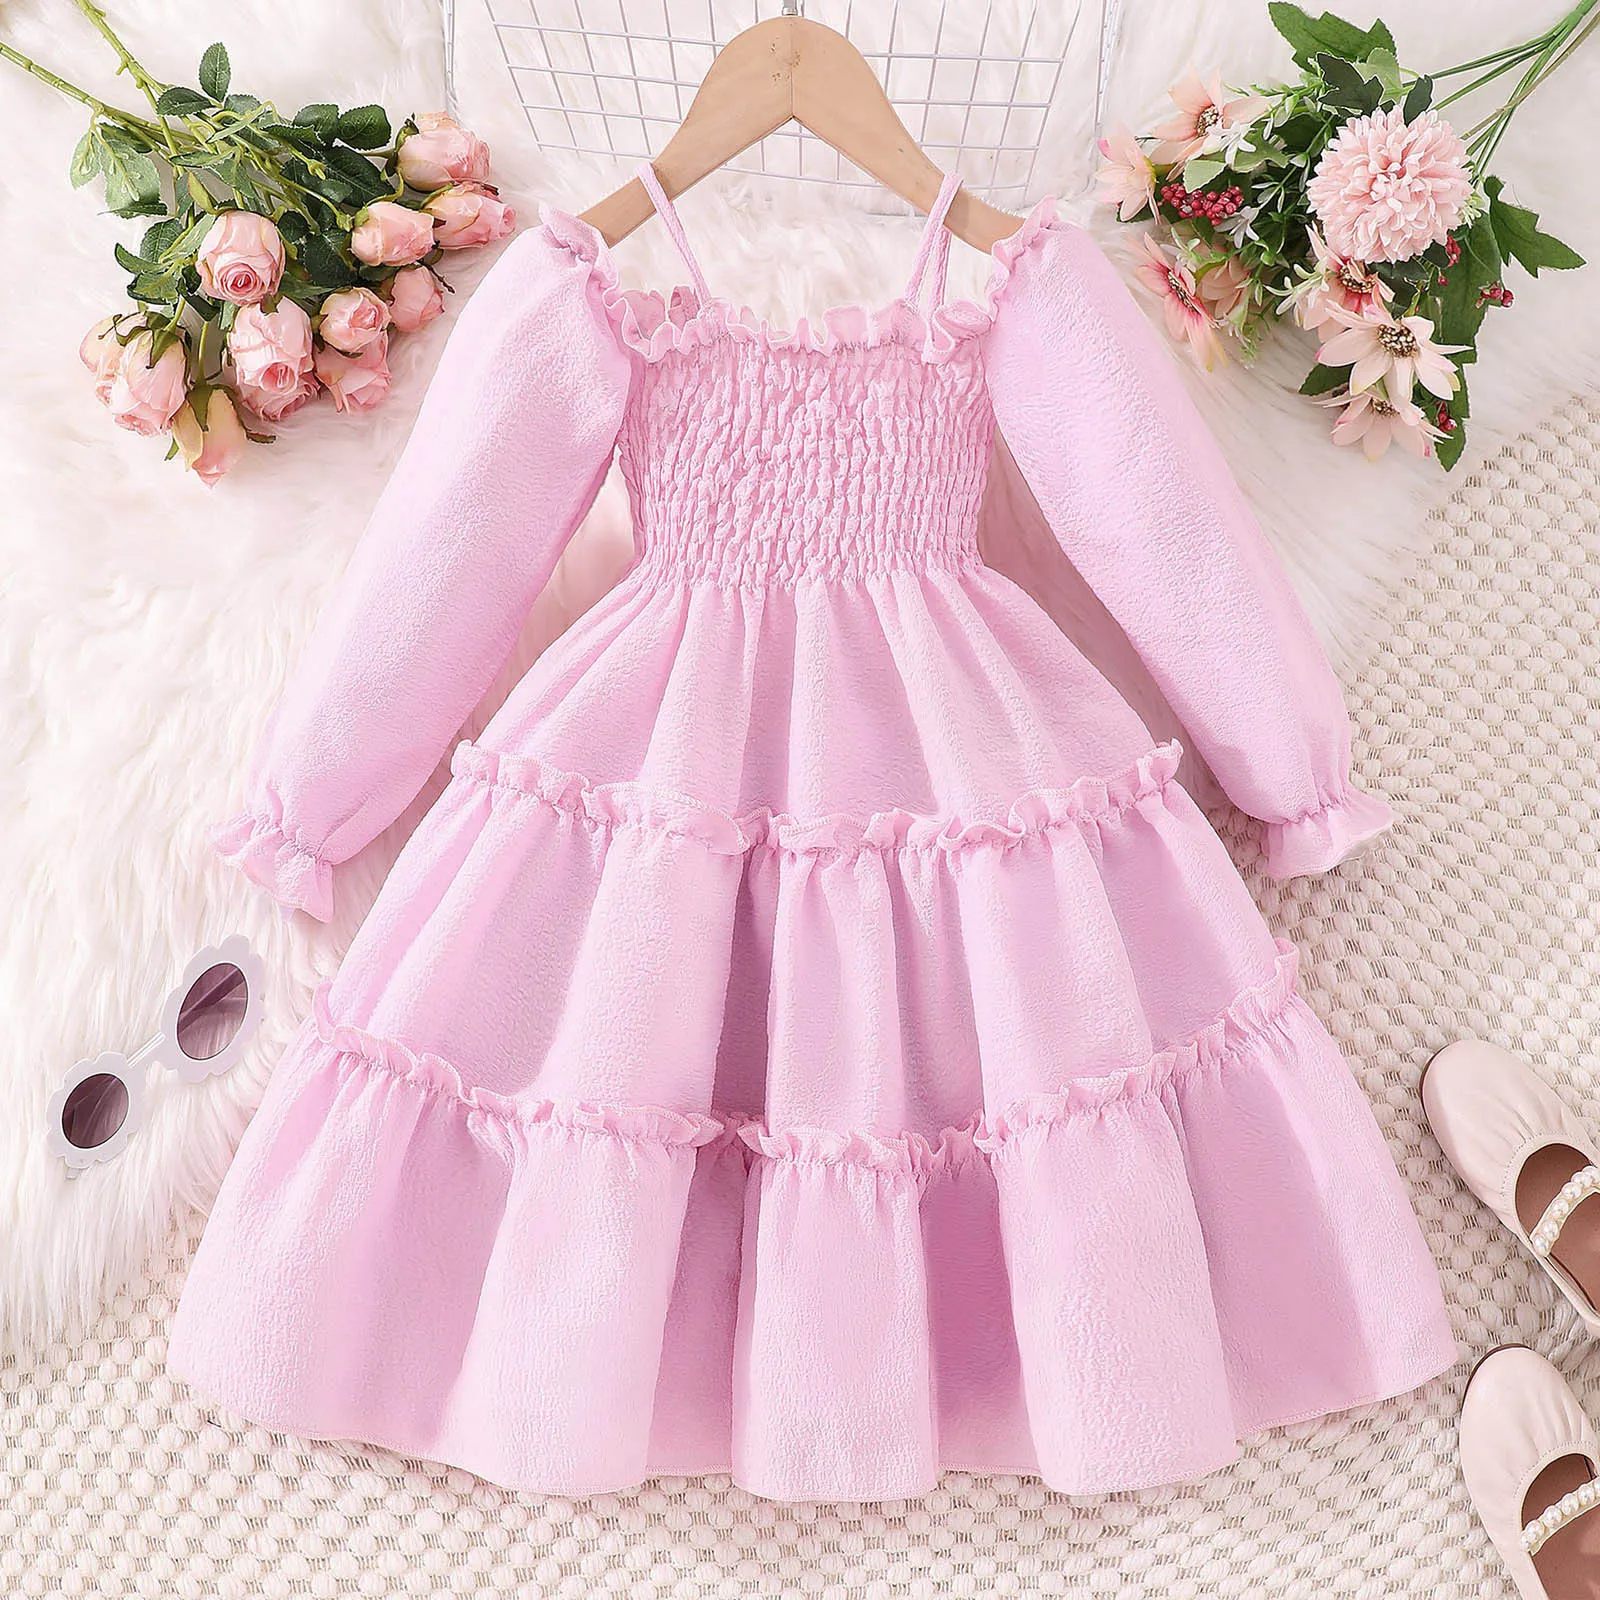 

Toddler Girls Shirred Puff Long Sleeve Frill Trim Flowers Pattern Party Dress For Girls 2 to 7 Years Kids Spring Autumn Clothes